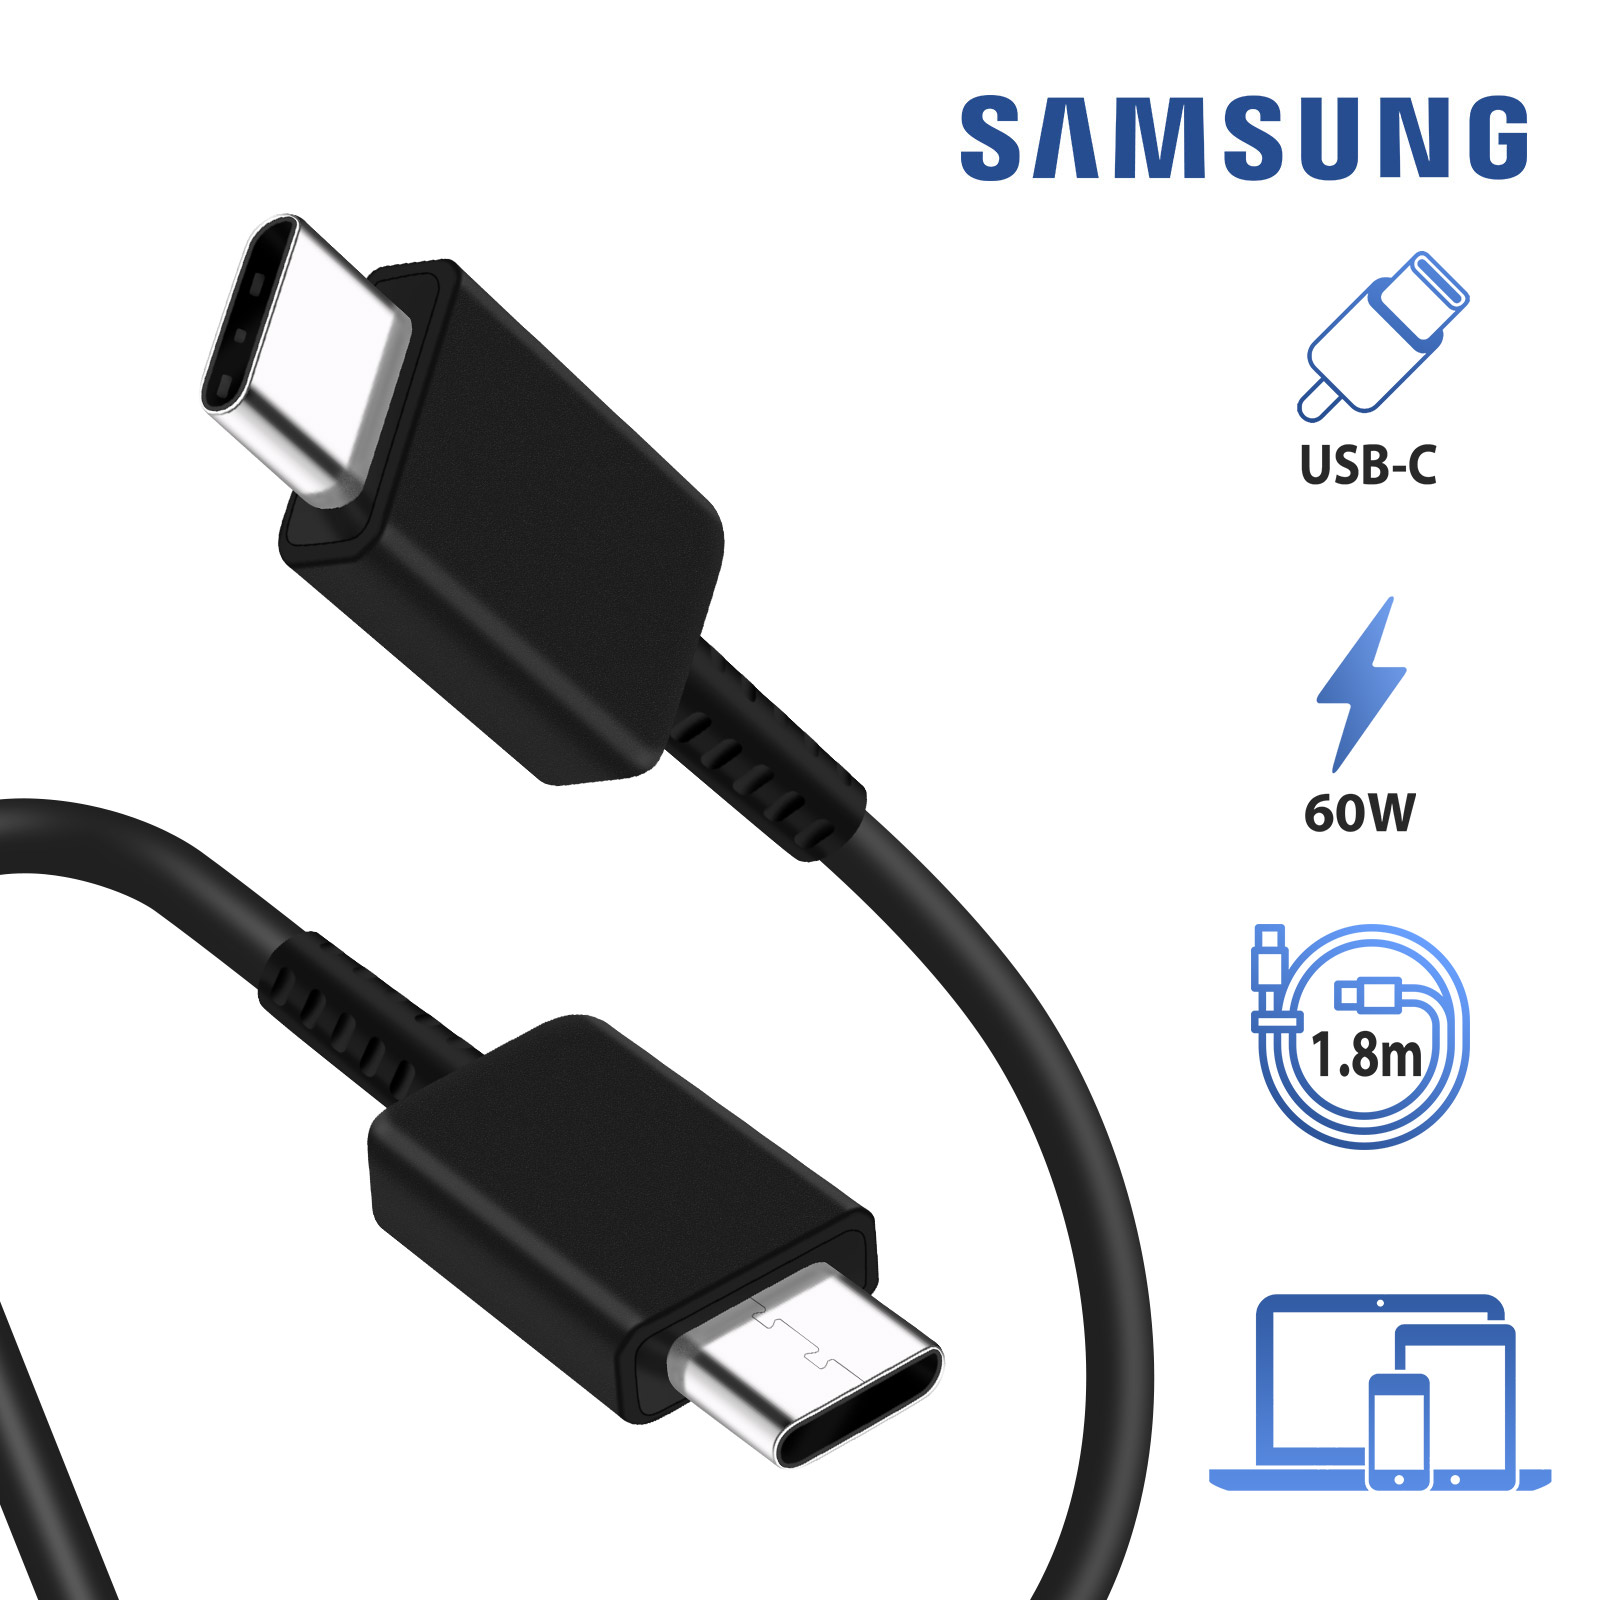 Chargeur USB C VISIODIRECT 2 Cables pour Redmi Note 9 Pro Max